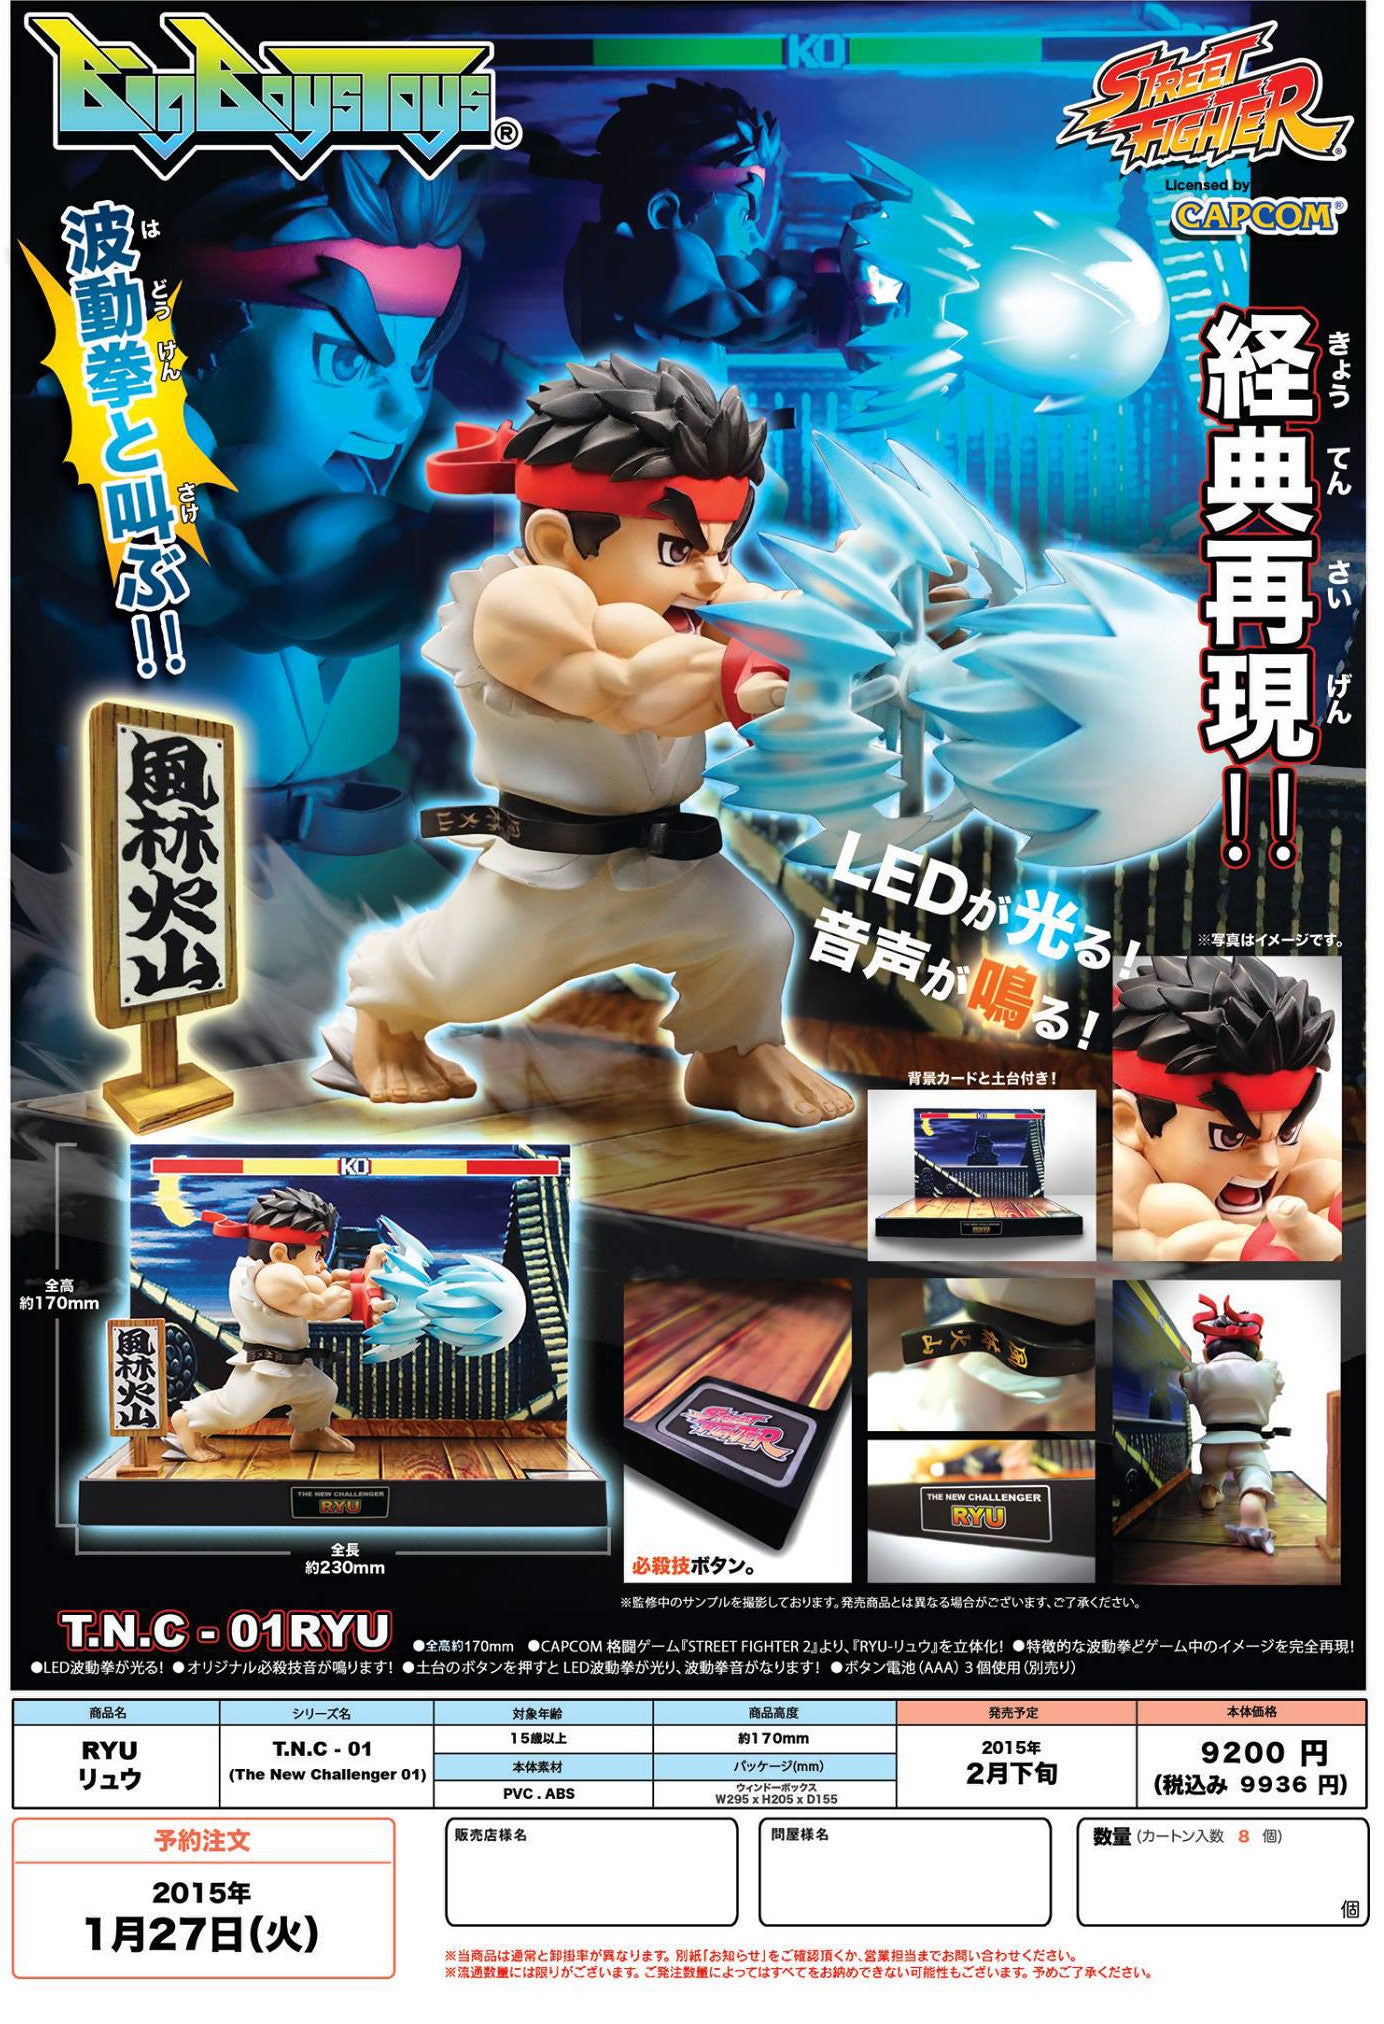 Street Fighter The New Challenger Figure 01 - Ryu Retropixl Retrogaming retro gaming Rare Console Collector Limited Edition Japan Import